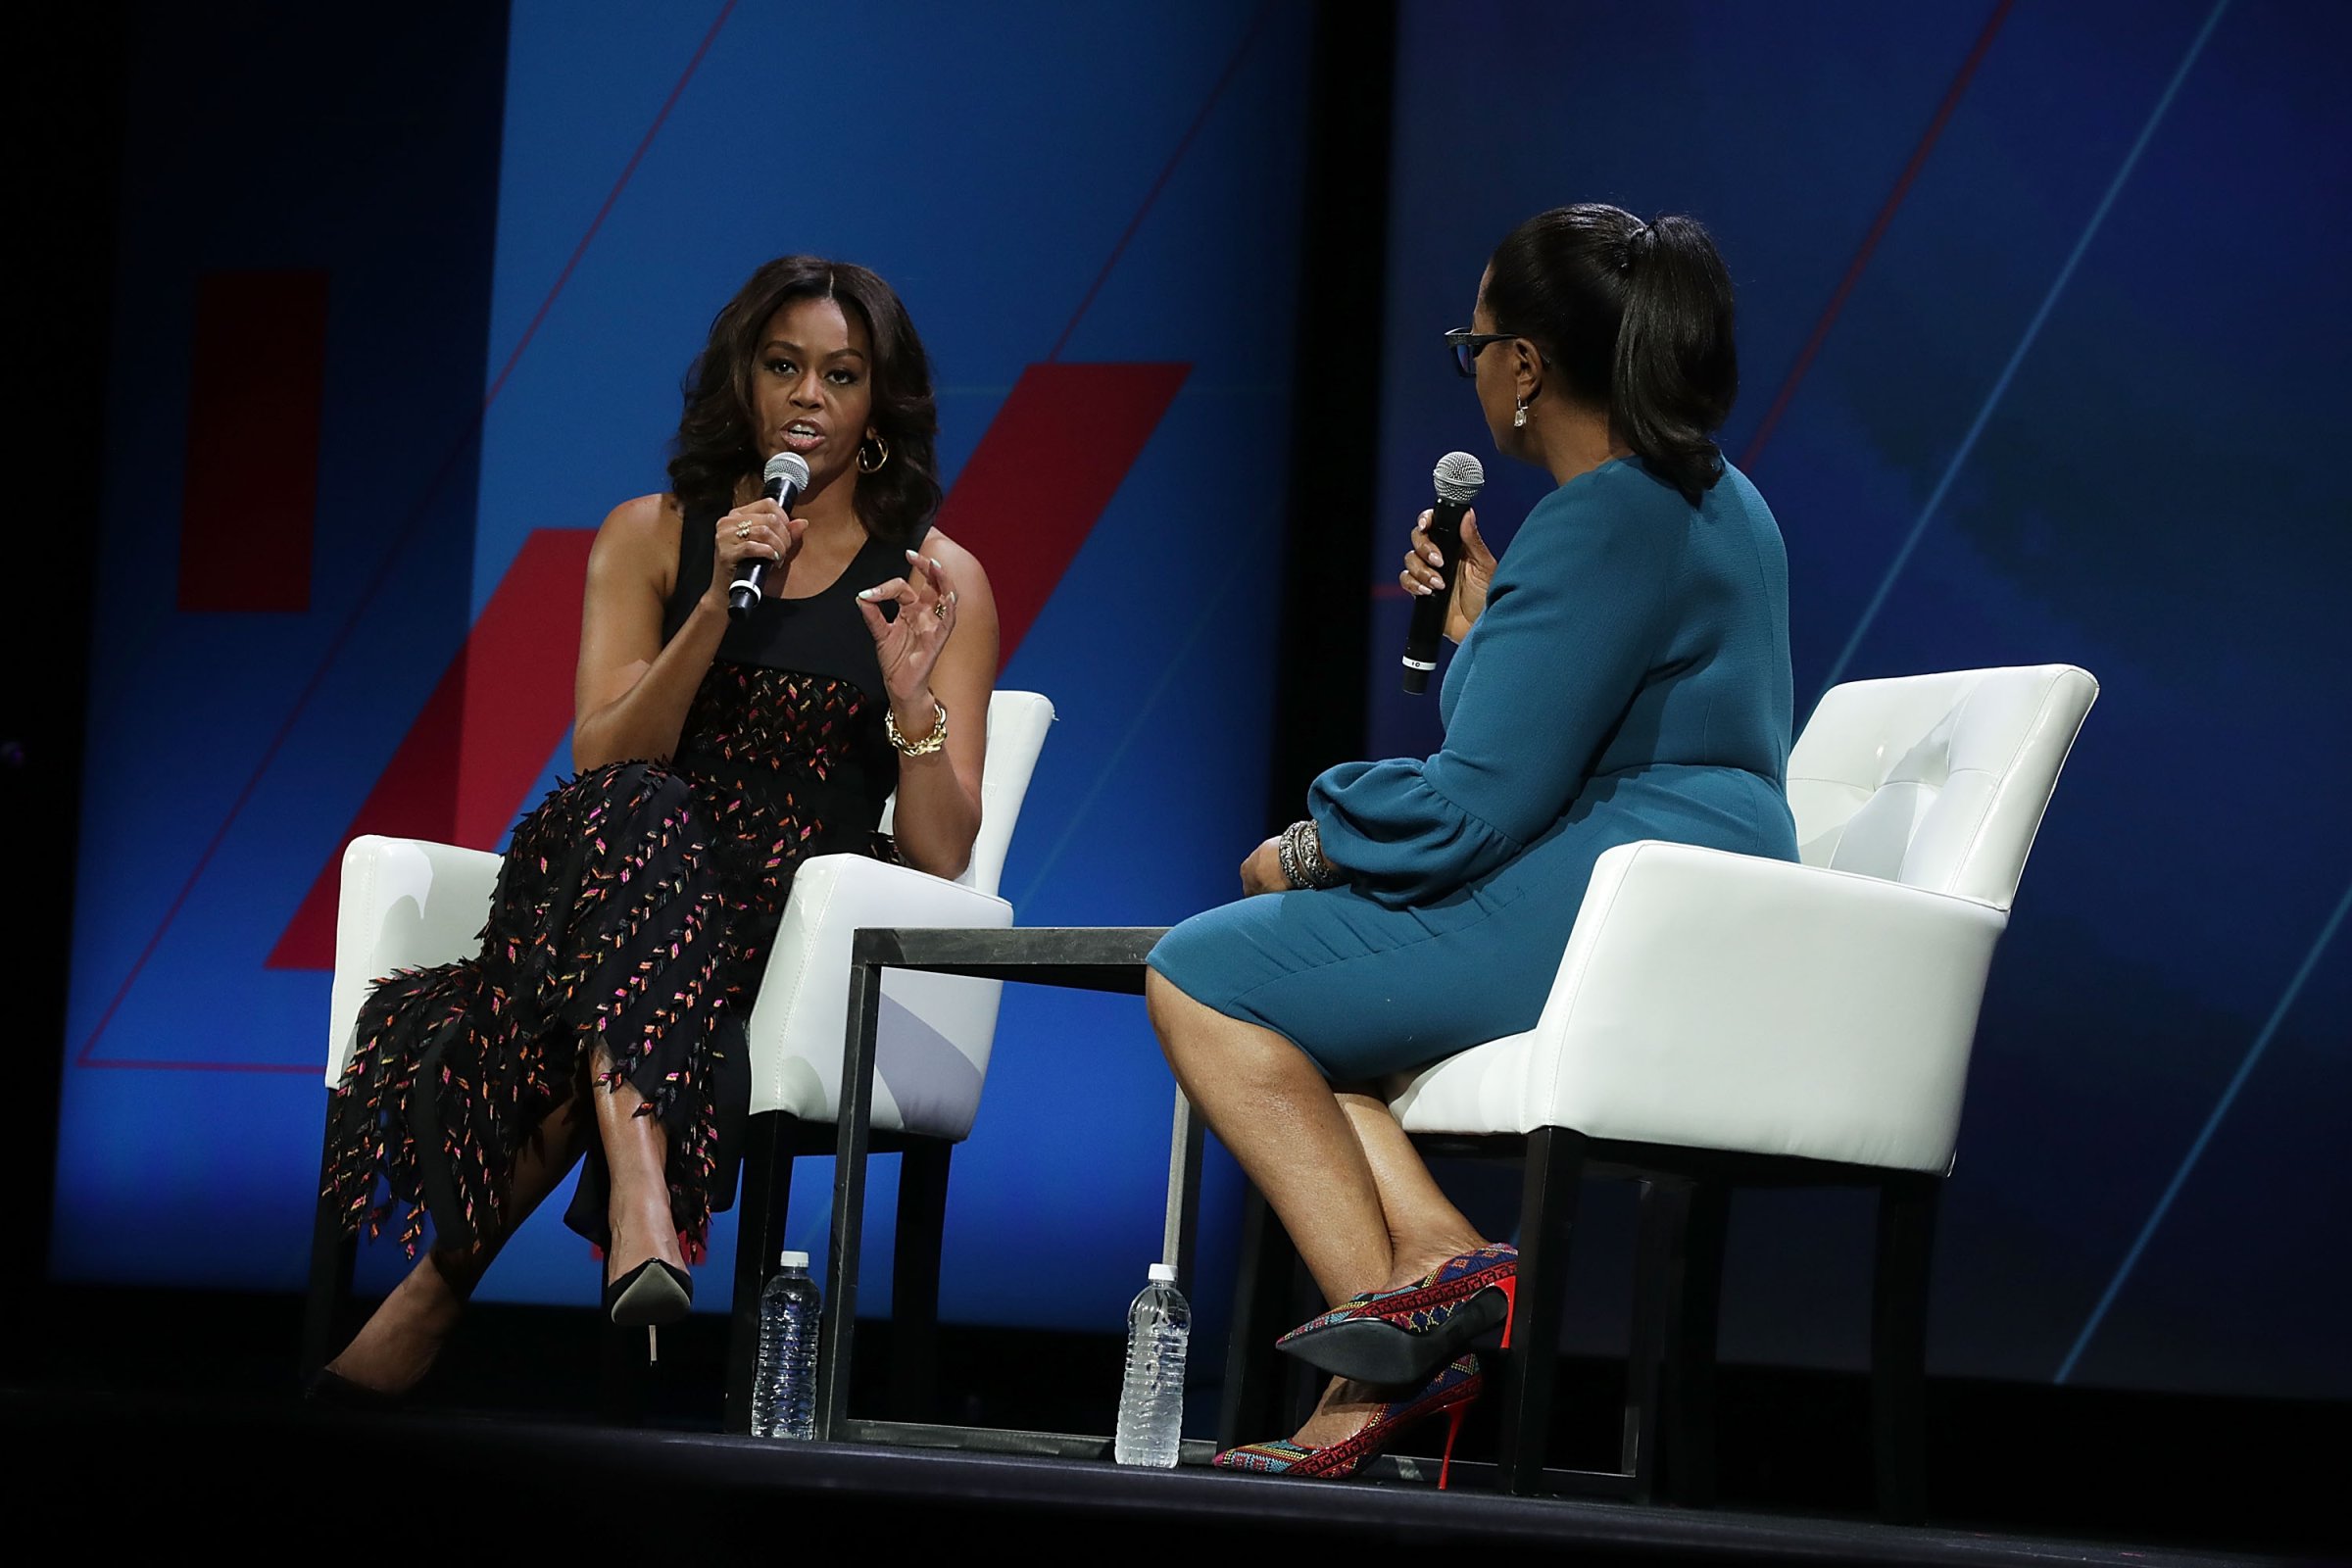 U.S. first lady Michelle Obama (L) and Oprah Winfrey (R) participate in a conversation on "Trailblazing the Path for the Next Generation of Women" during the White House Summit on the United State Of Women June 14, 2016 in Washington, DC. The White House hosts the first ever summit to push for gender equality.